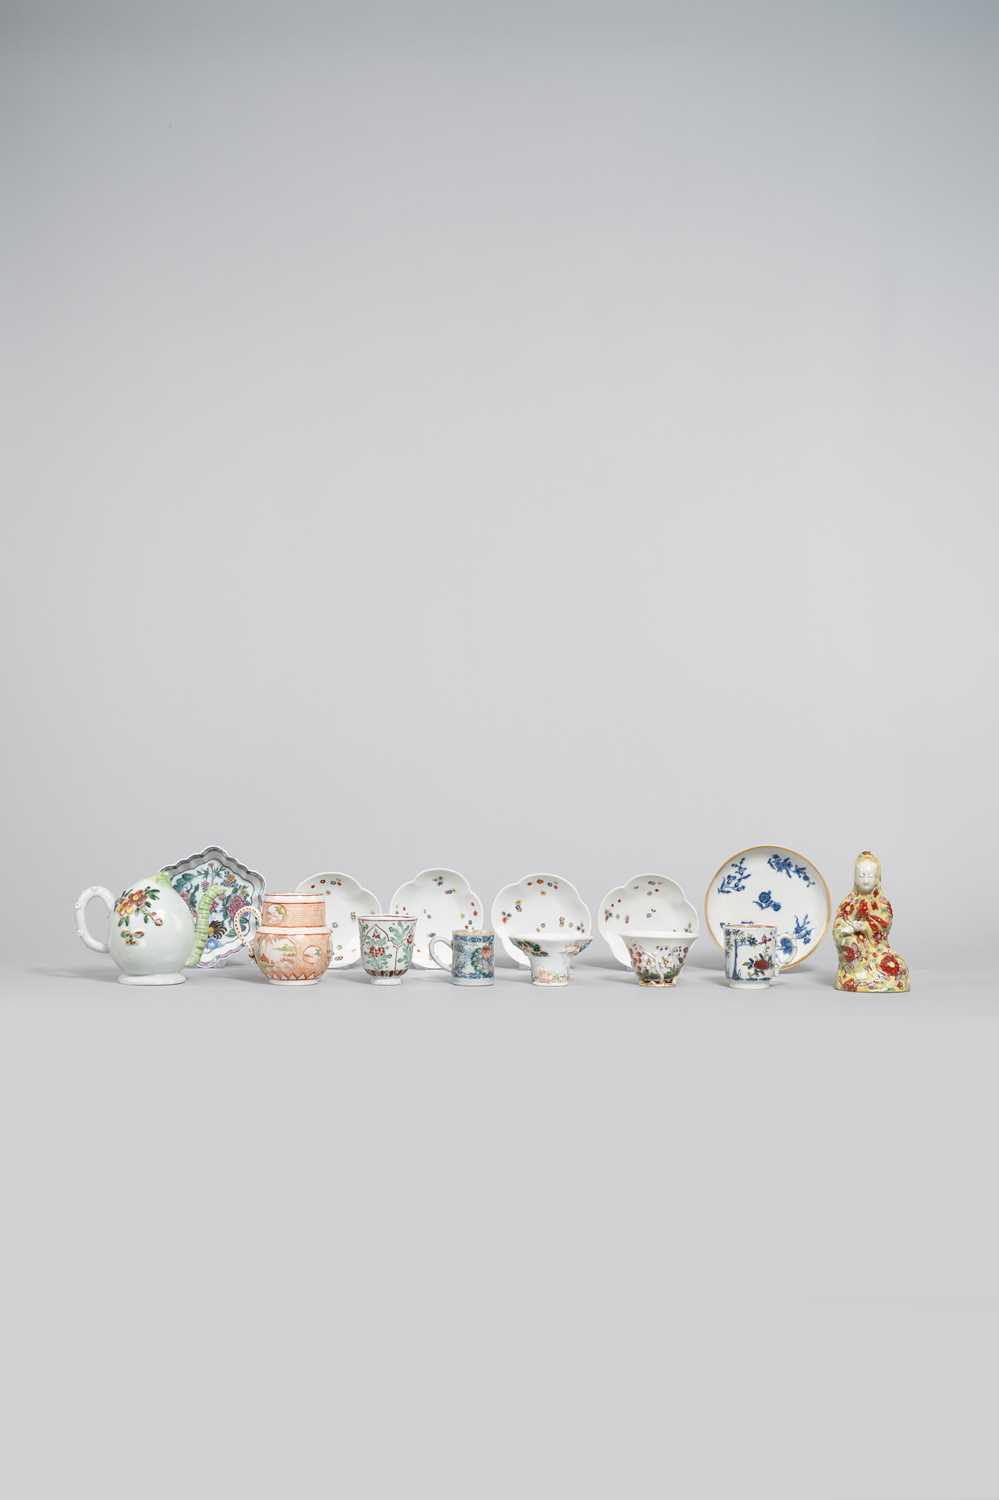 A SMALL COLLECTION OF CHINESE LATER-ENAMELLED ITEMS THE PORCELAIN MOSTLY 18TH CENTURY Comprising: